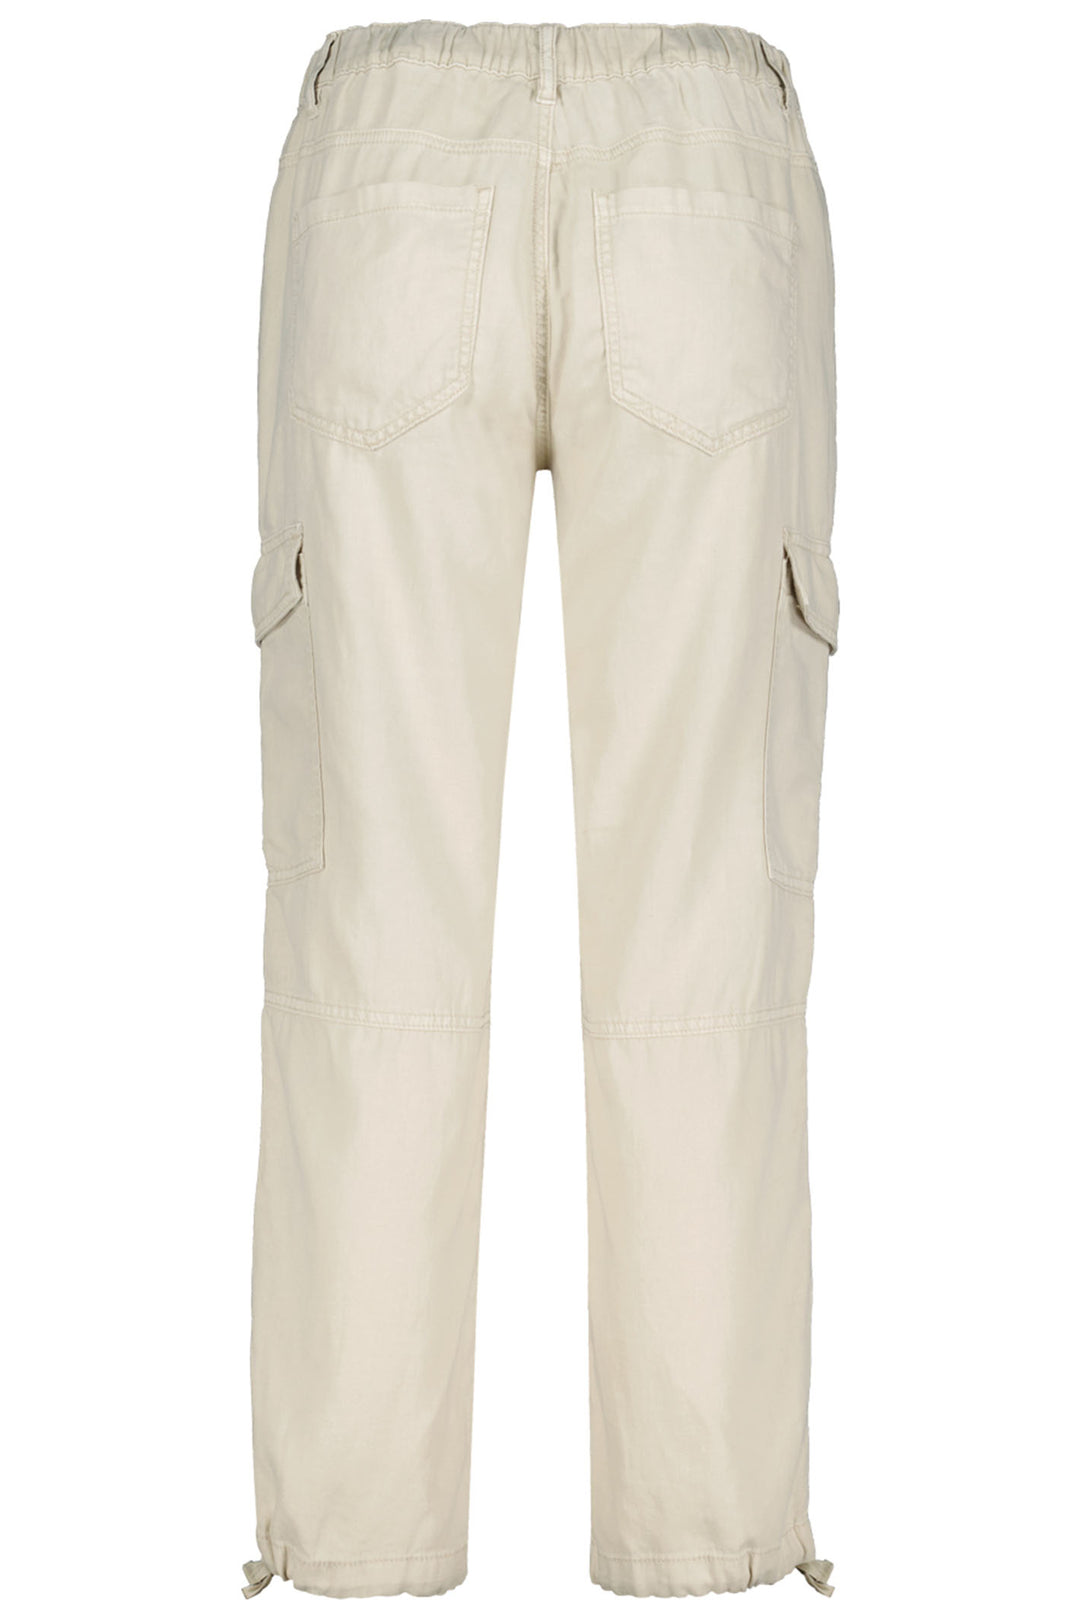 Red Button SRB4167 Conny Pearl Cream Cargo Trousers - Olivia Grace Fashion